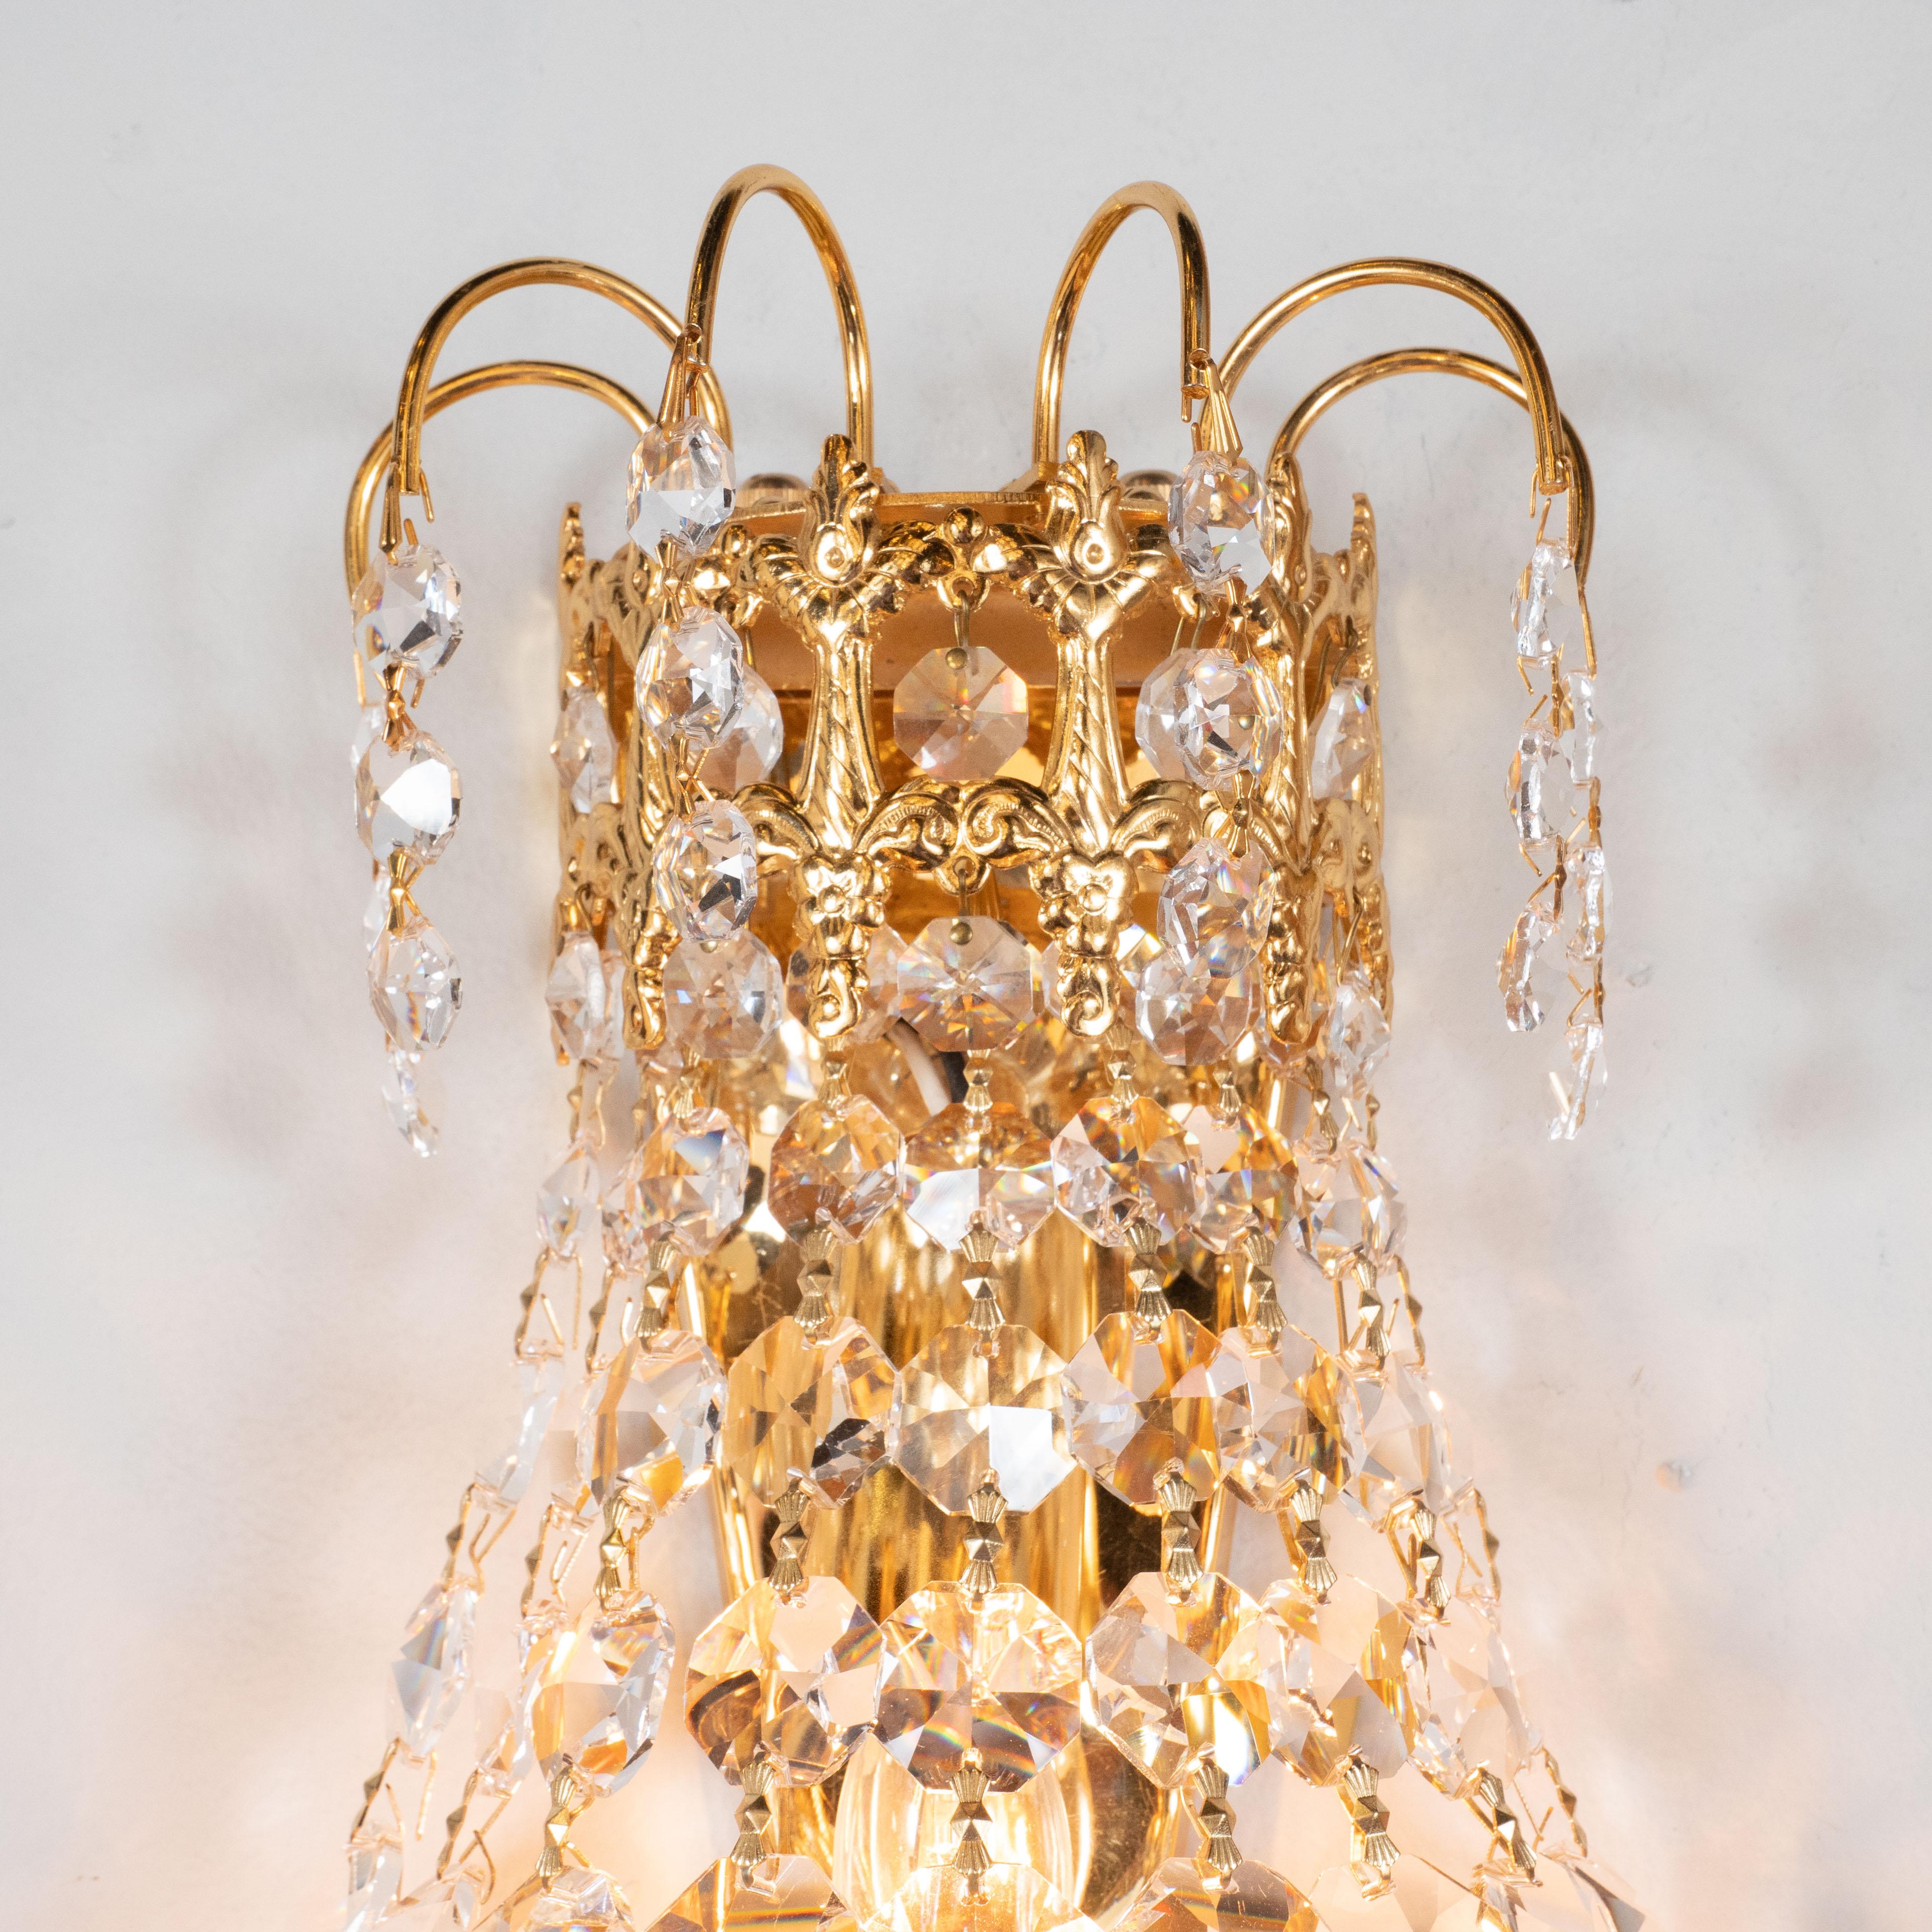 Mid-20th Century Hollywood Regency Faceted Crystal Teardrop Sconces with Gold-Plated Fittings